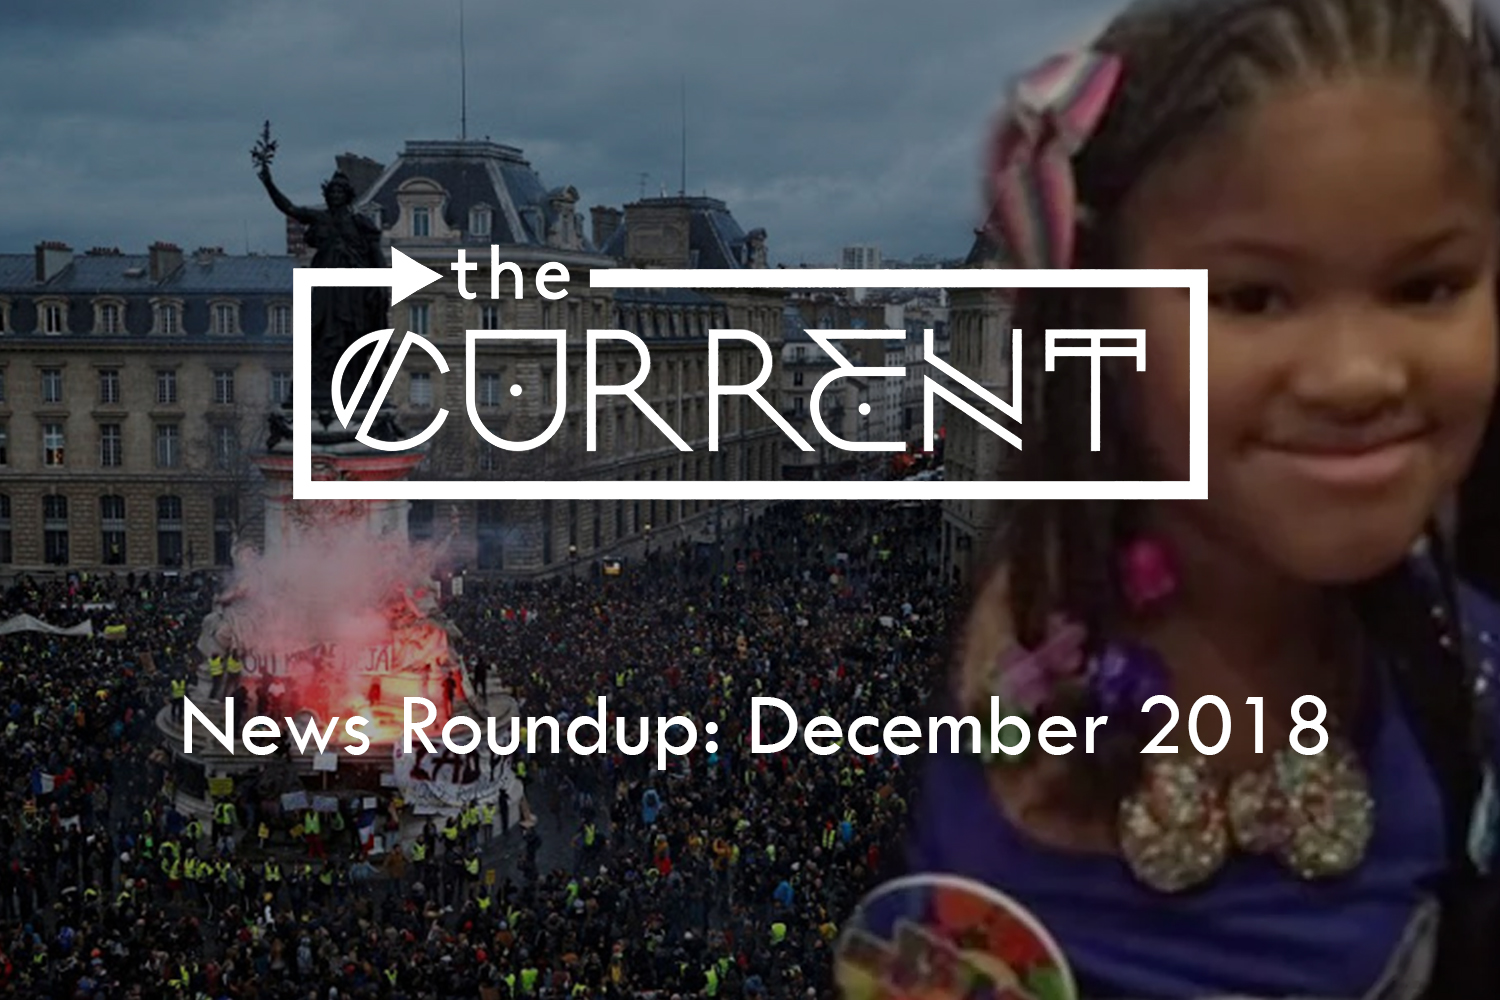 GRAPHIC: News round up for December 2018. This image is of the riots/protest in France as part of the "yellow vest" movement and is overlayed with photo of Jasmine Barnes. Graphic created by The Signal Reporter Trey Blakely and Online Editor Alyssa Shotwell.